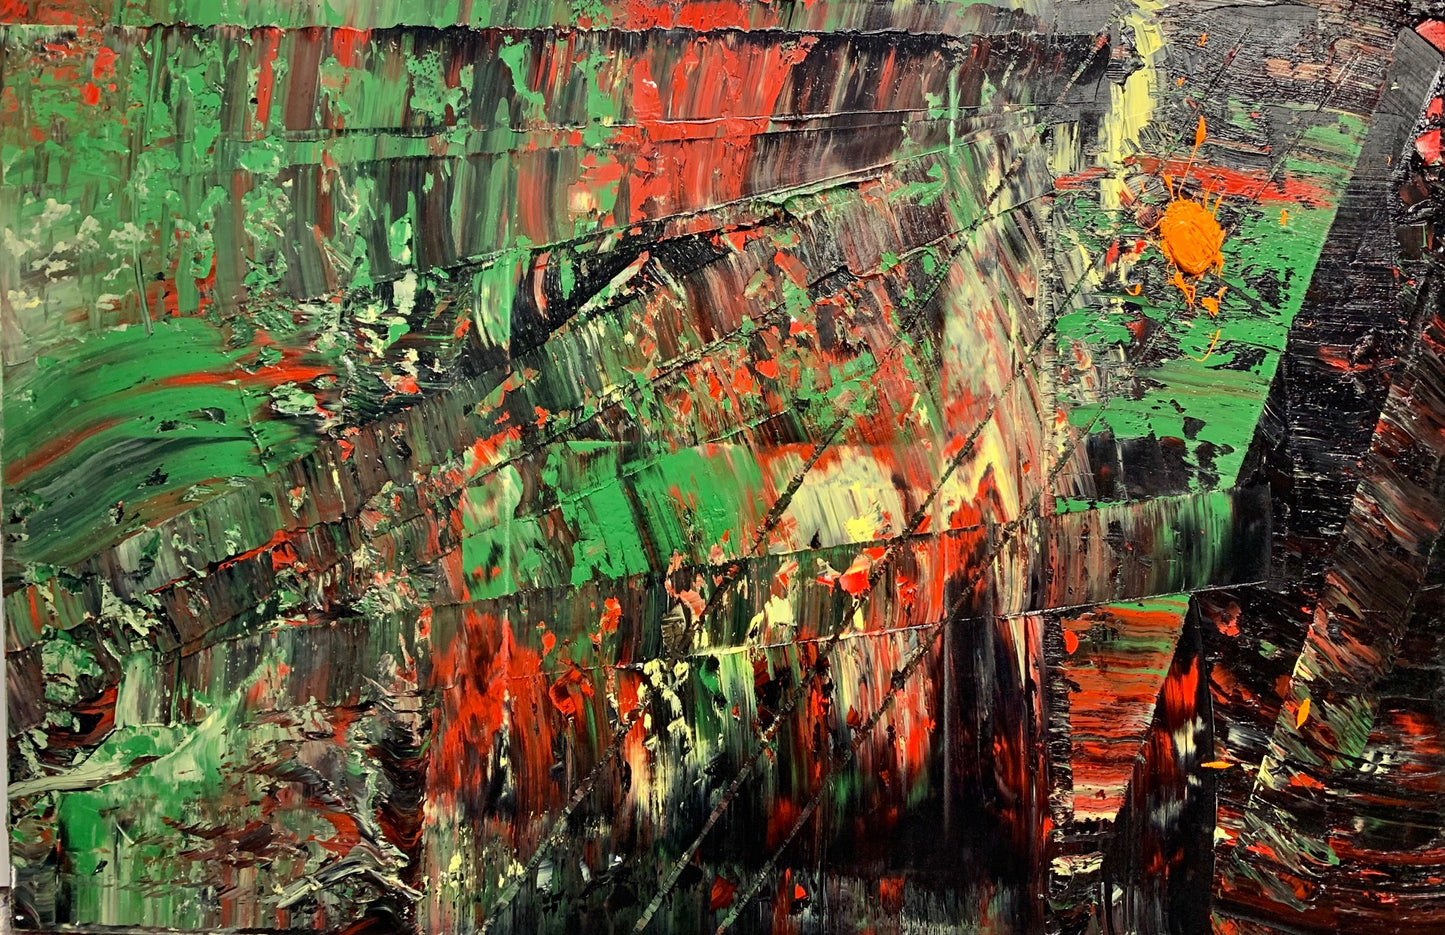 Niam  - 40"x60" Oil On Canvas, Sold 2020